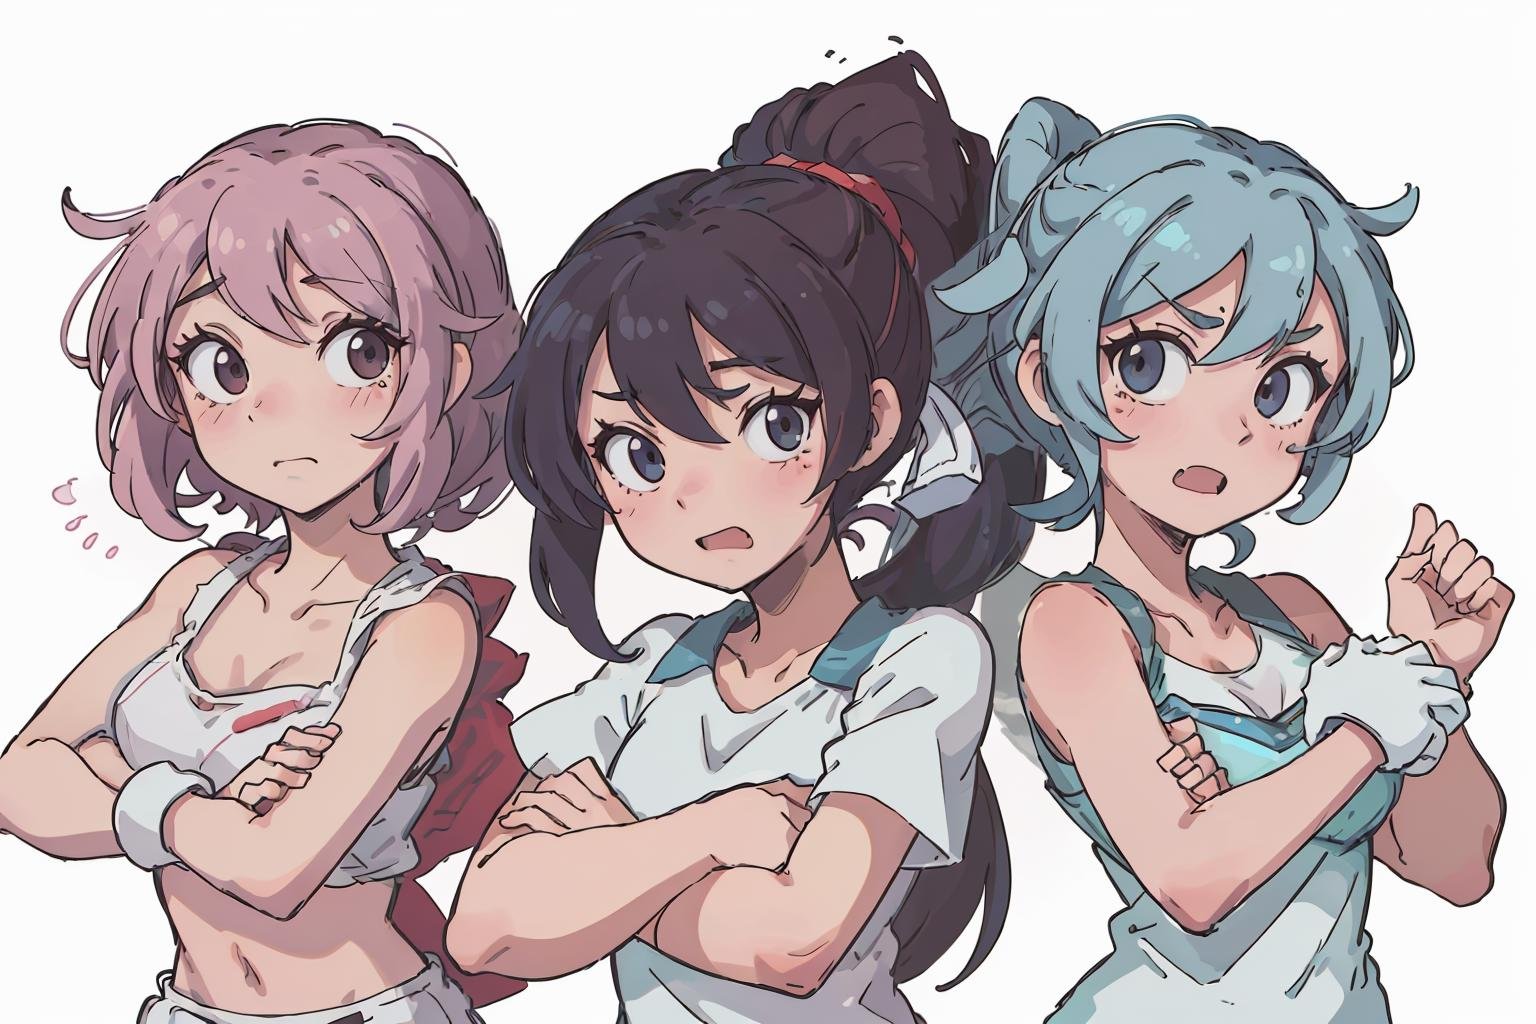 (best quality:0.8) perfect anime illustration, mischievous rebellious group of friends at the tennis court